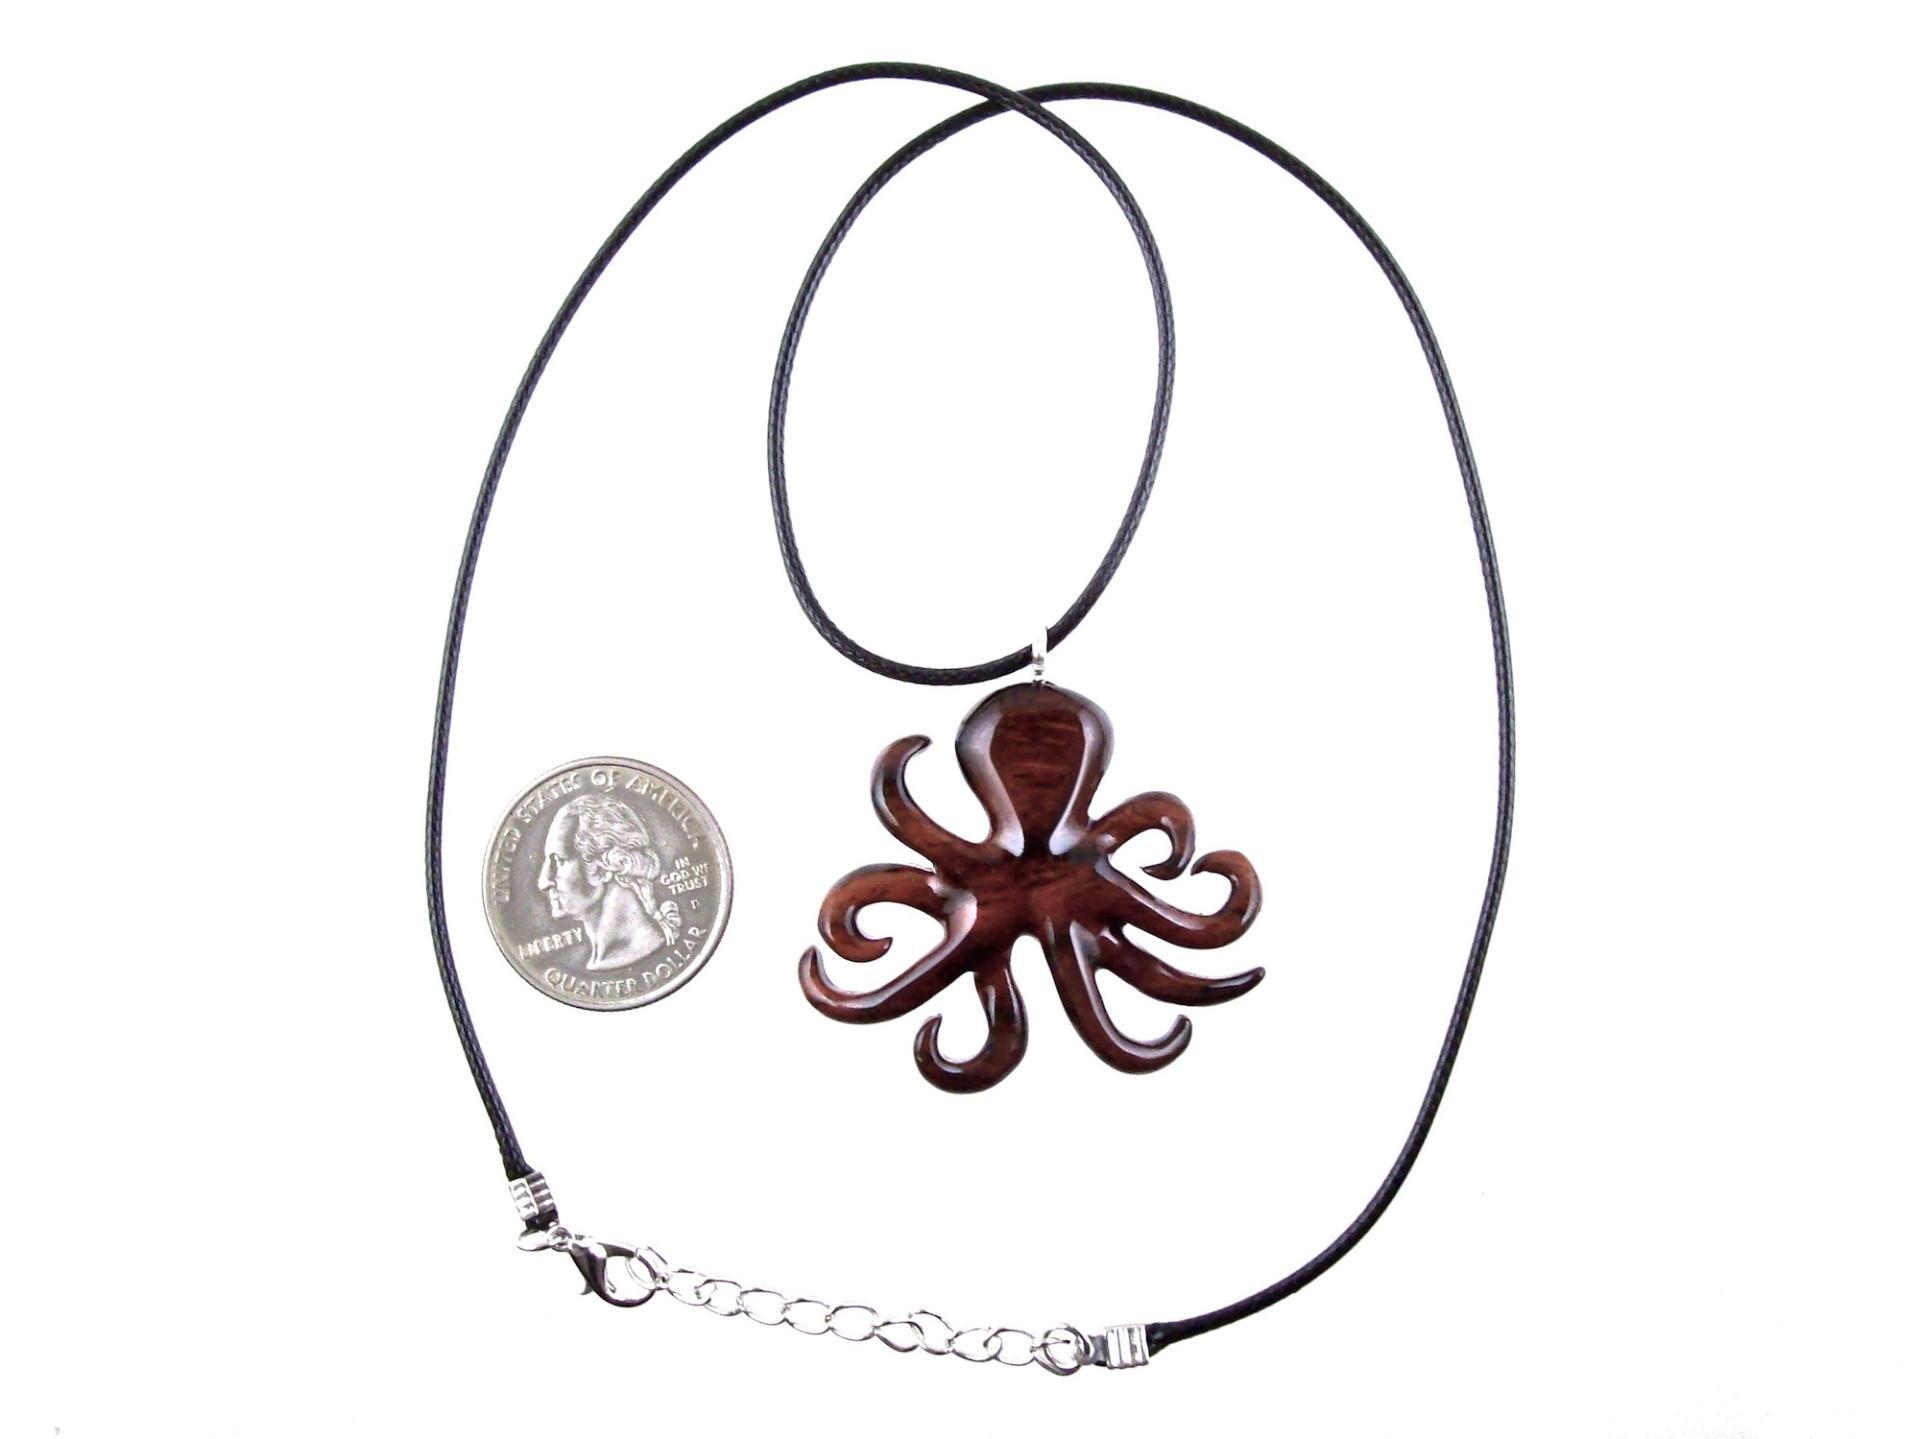 Octopus Necklace, Hand Carved Wooden Octopus Pendant, Squid Necklace, Kraken Pendant, Nautical Wood Jewelry Gift for Him Her